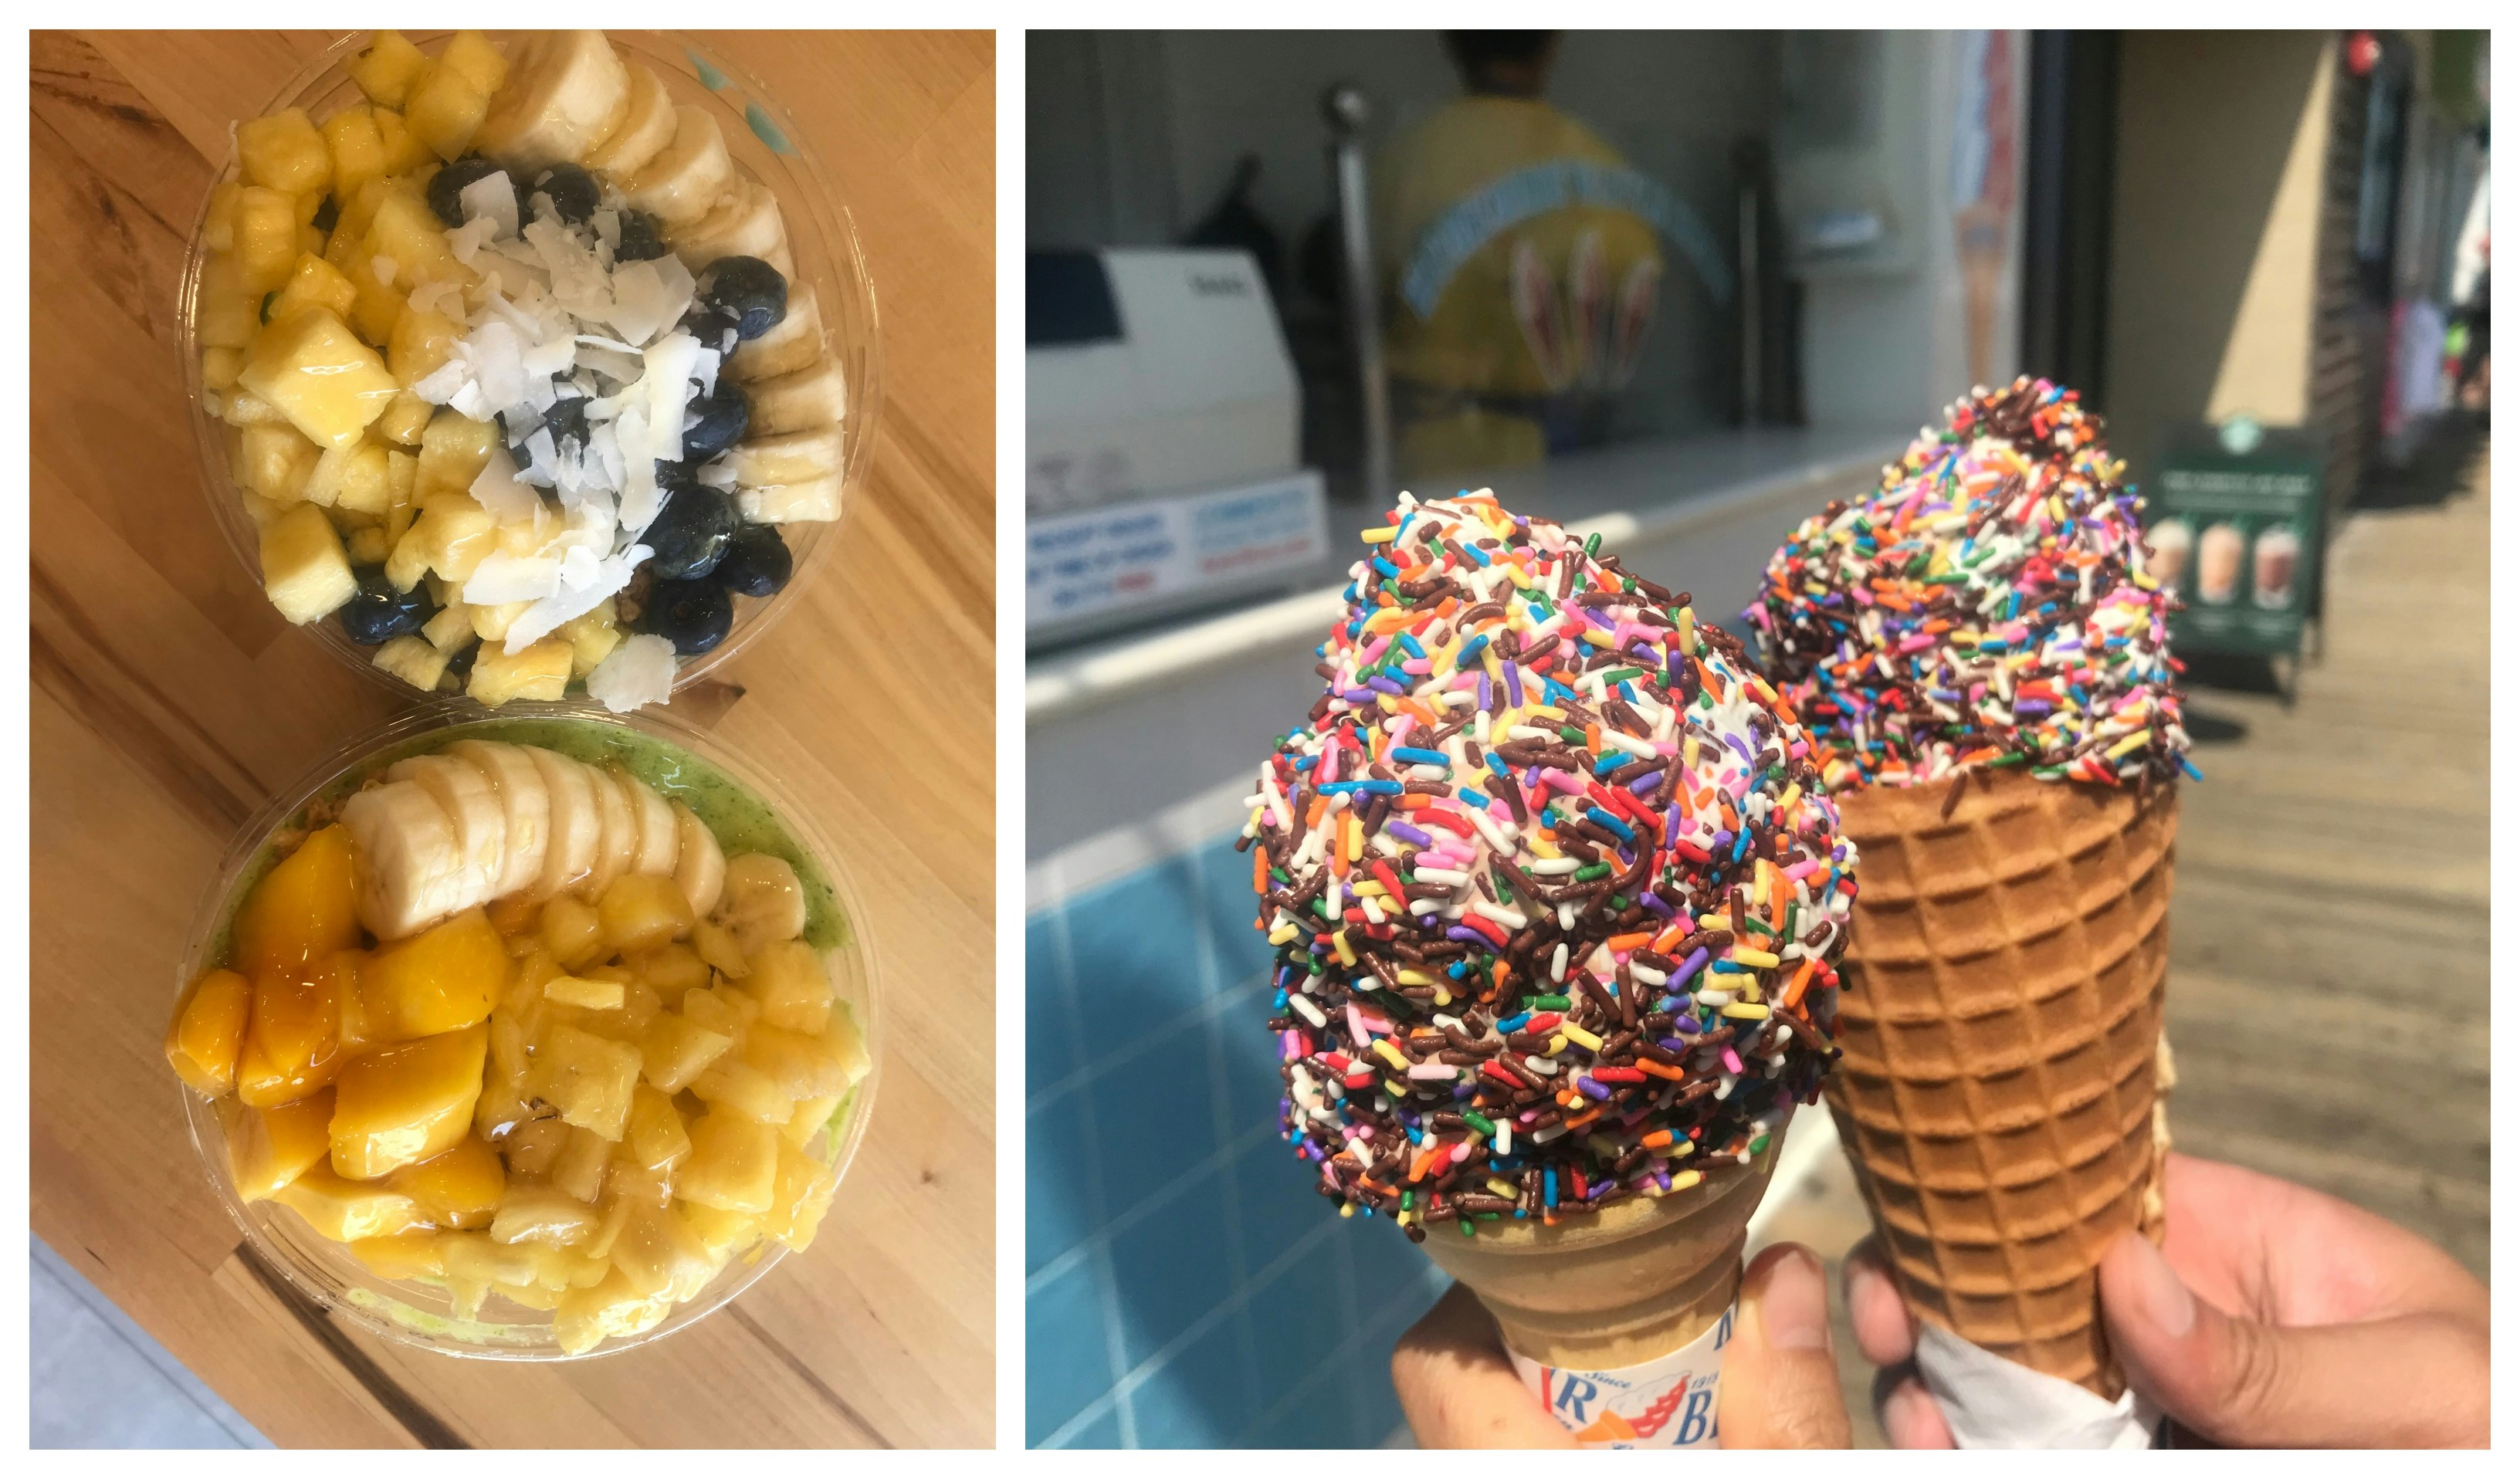 On the left, two bowls of chopped up fruit, on the right two ice-cream cones with sprinkles